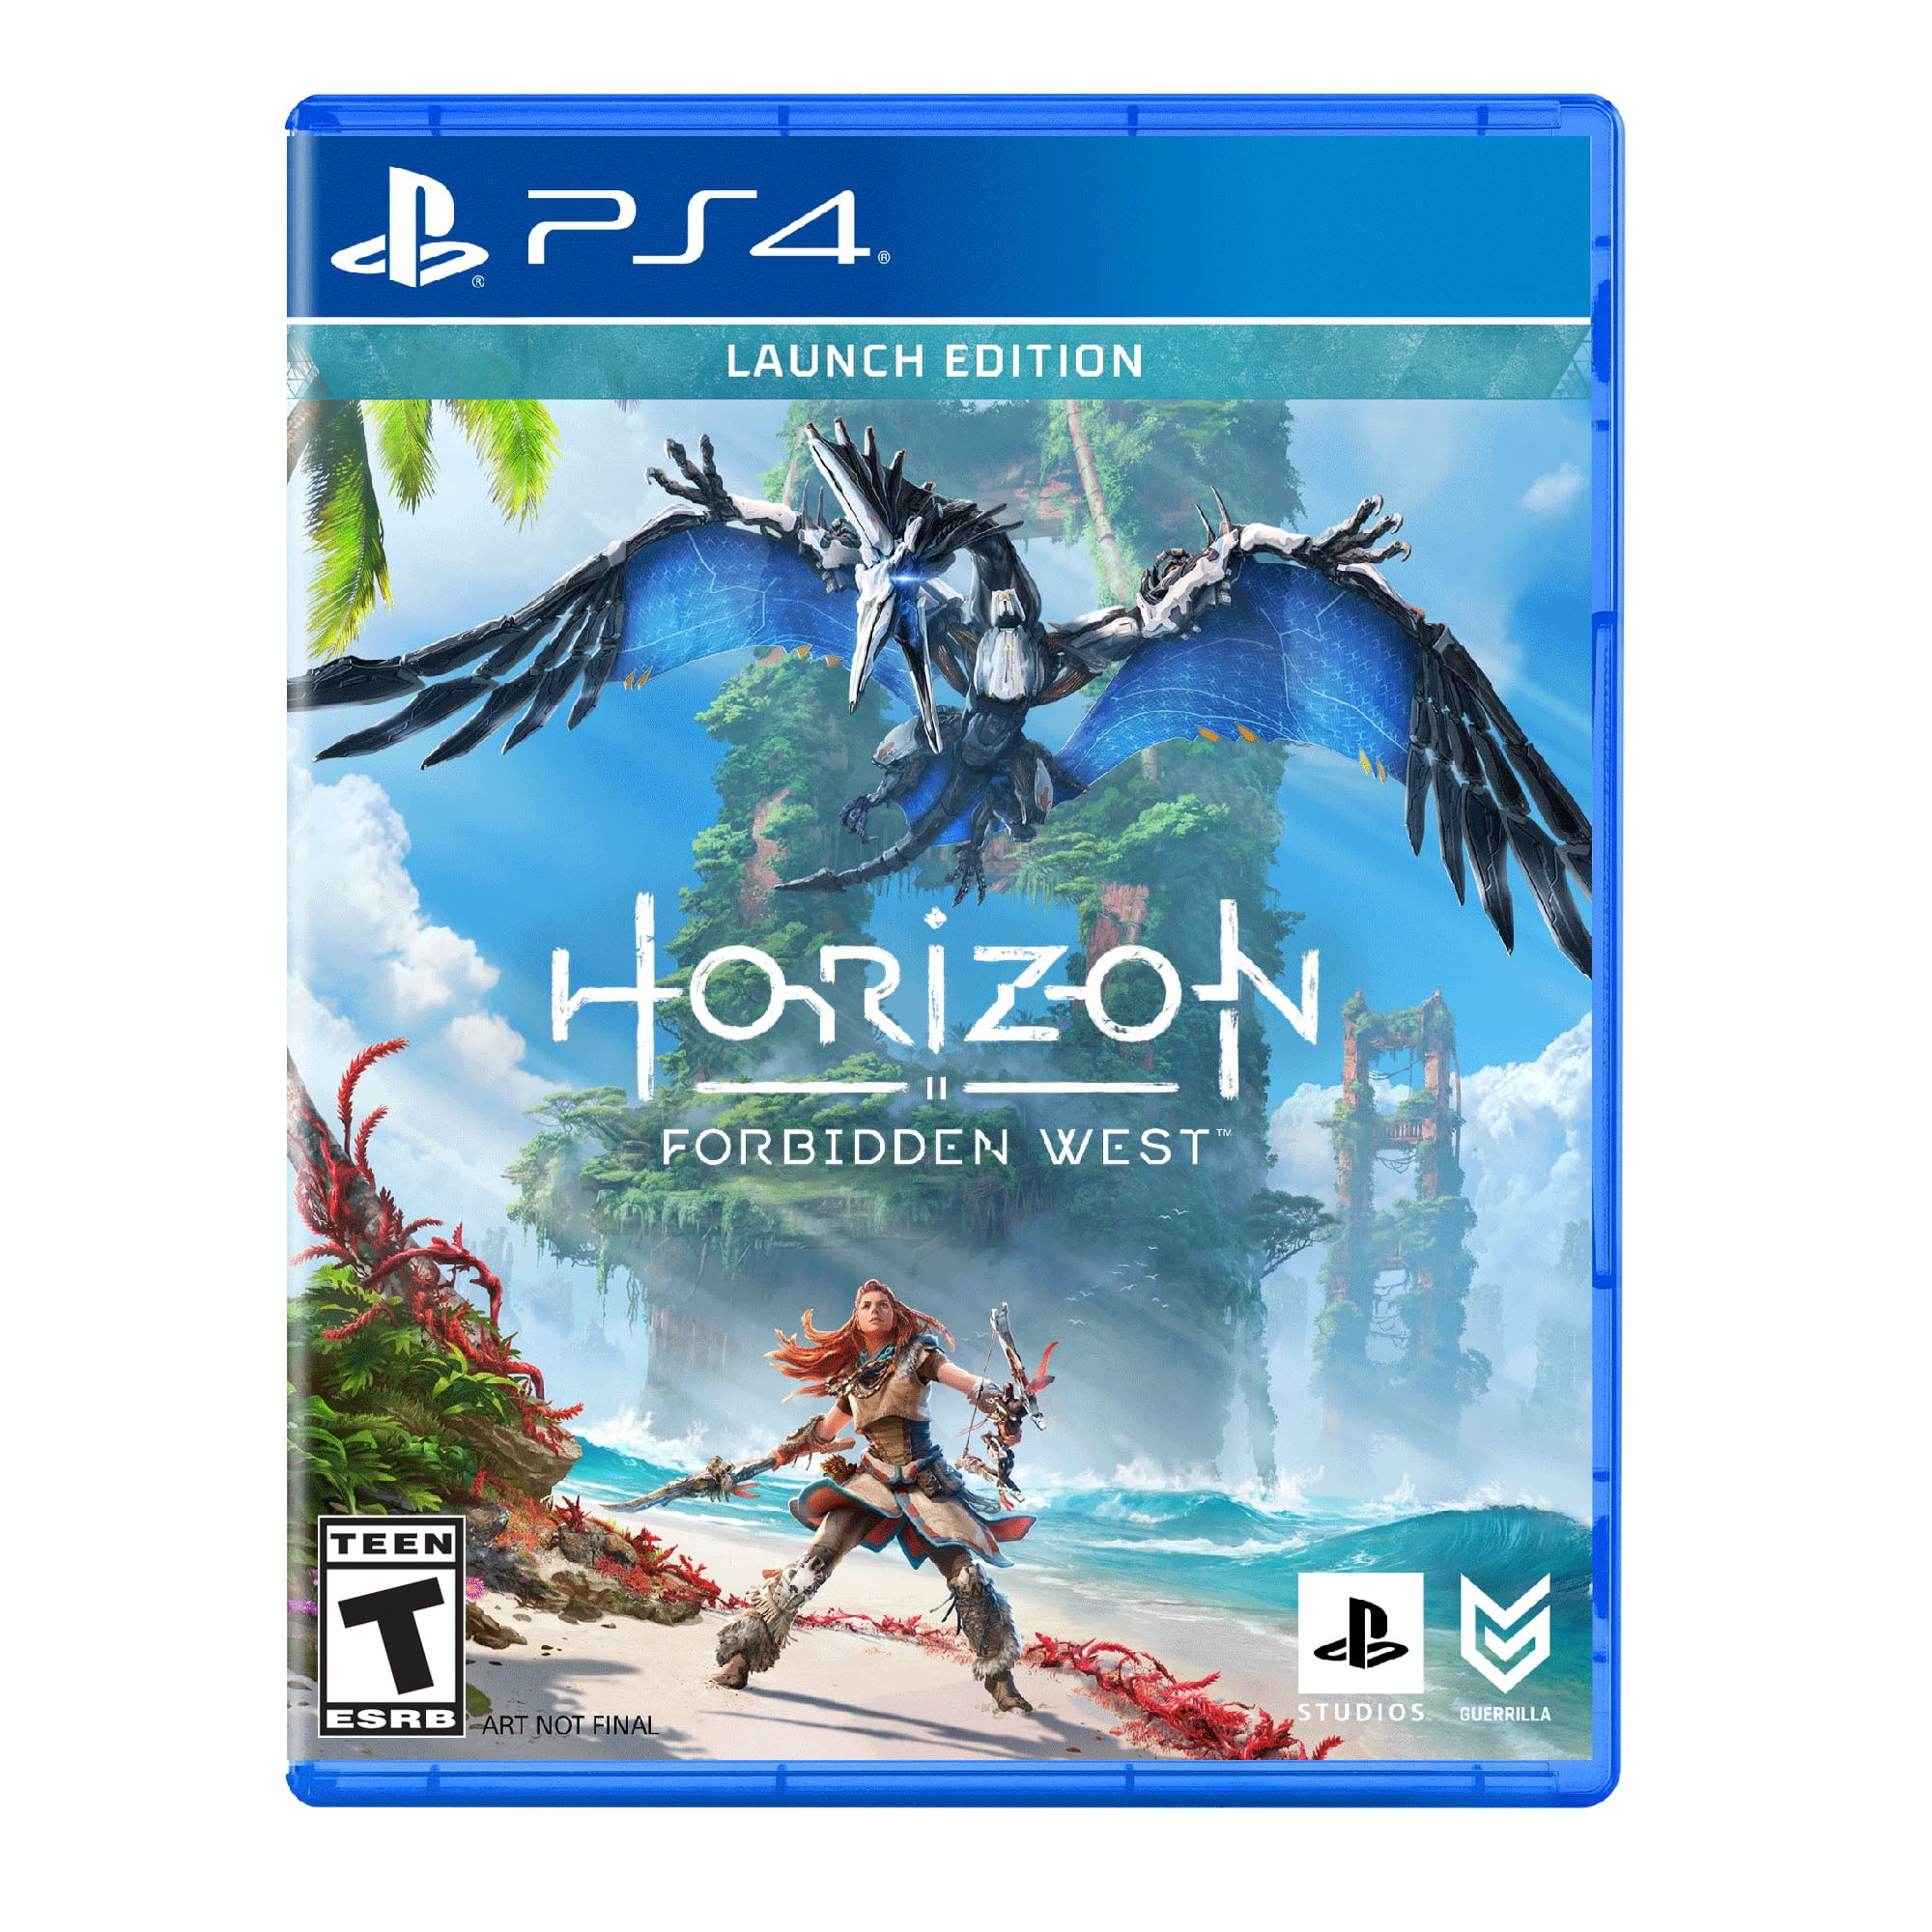 Horizon Forbidden West Launch Edition For Playstation 4 - $9.97 @ Walmart - IN STORE ONLY